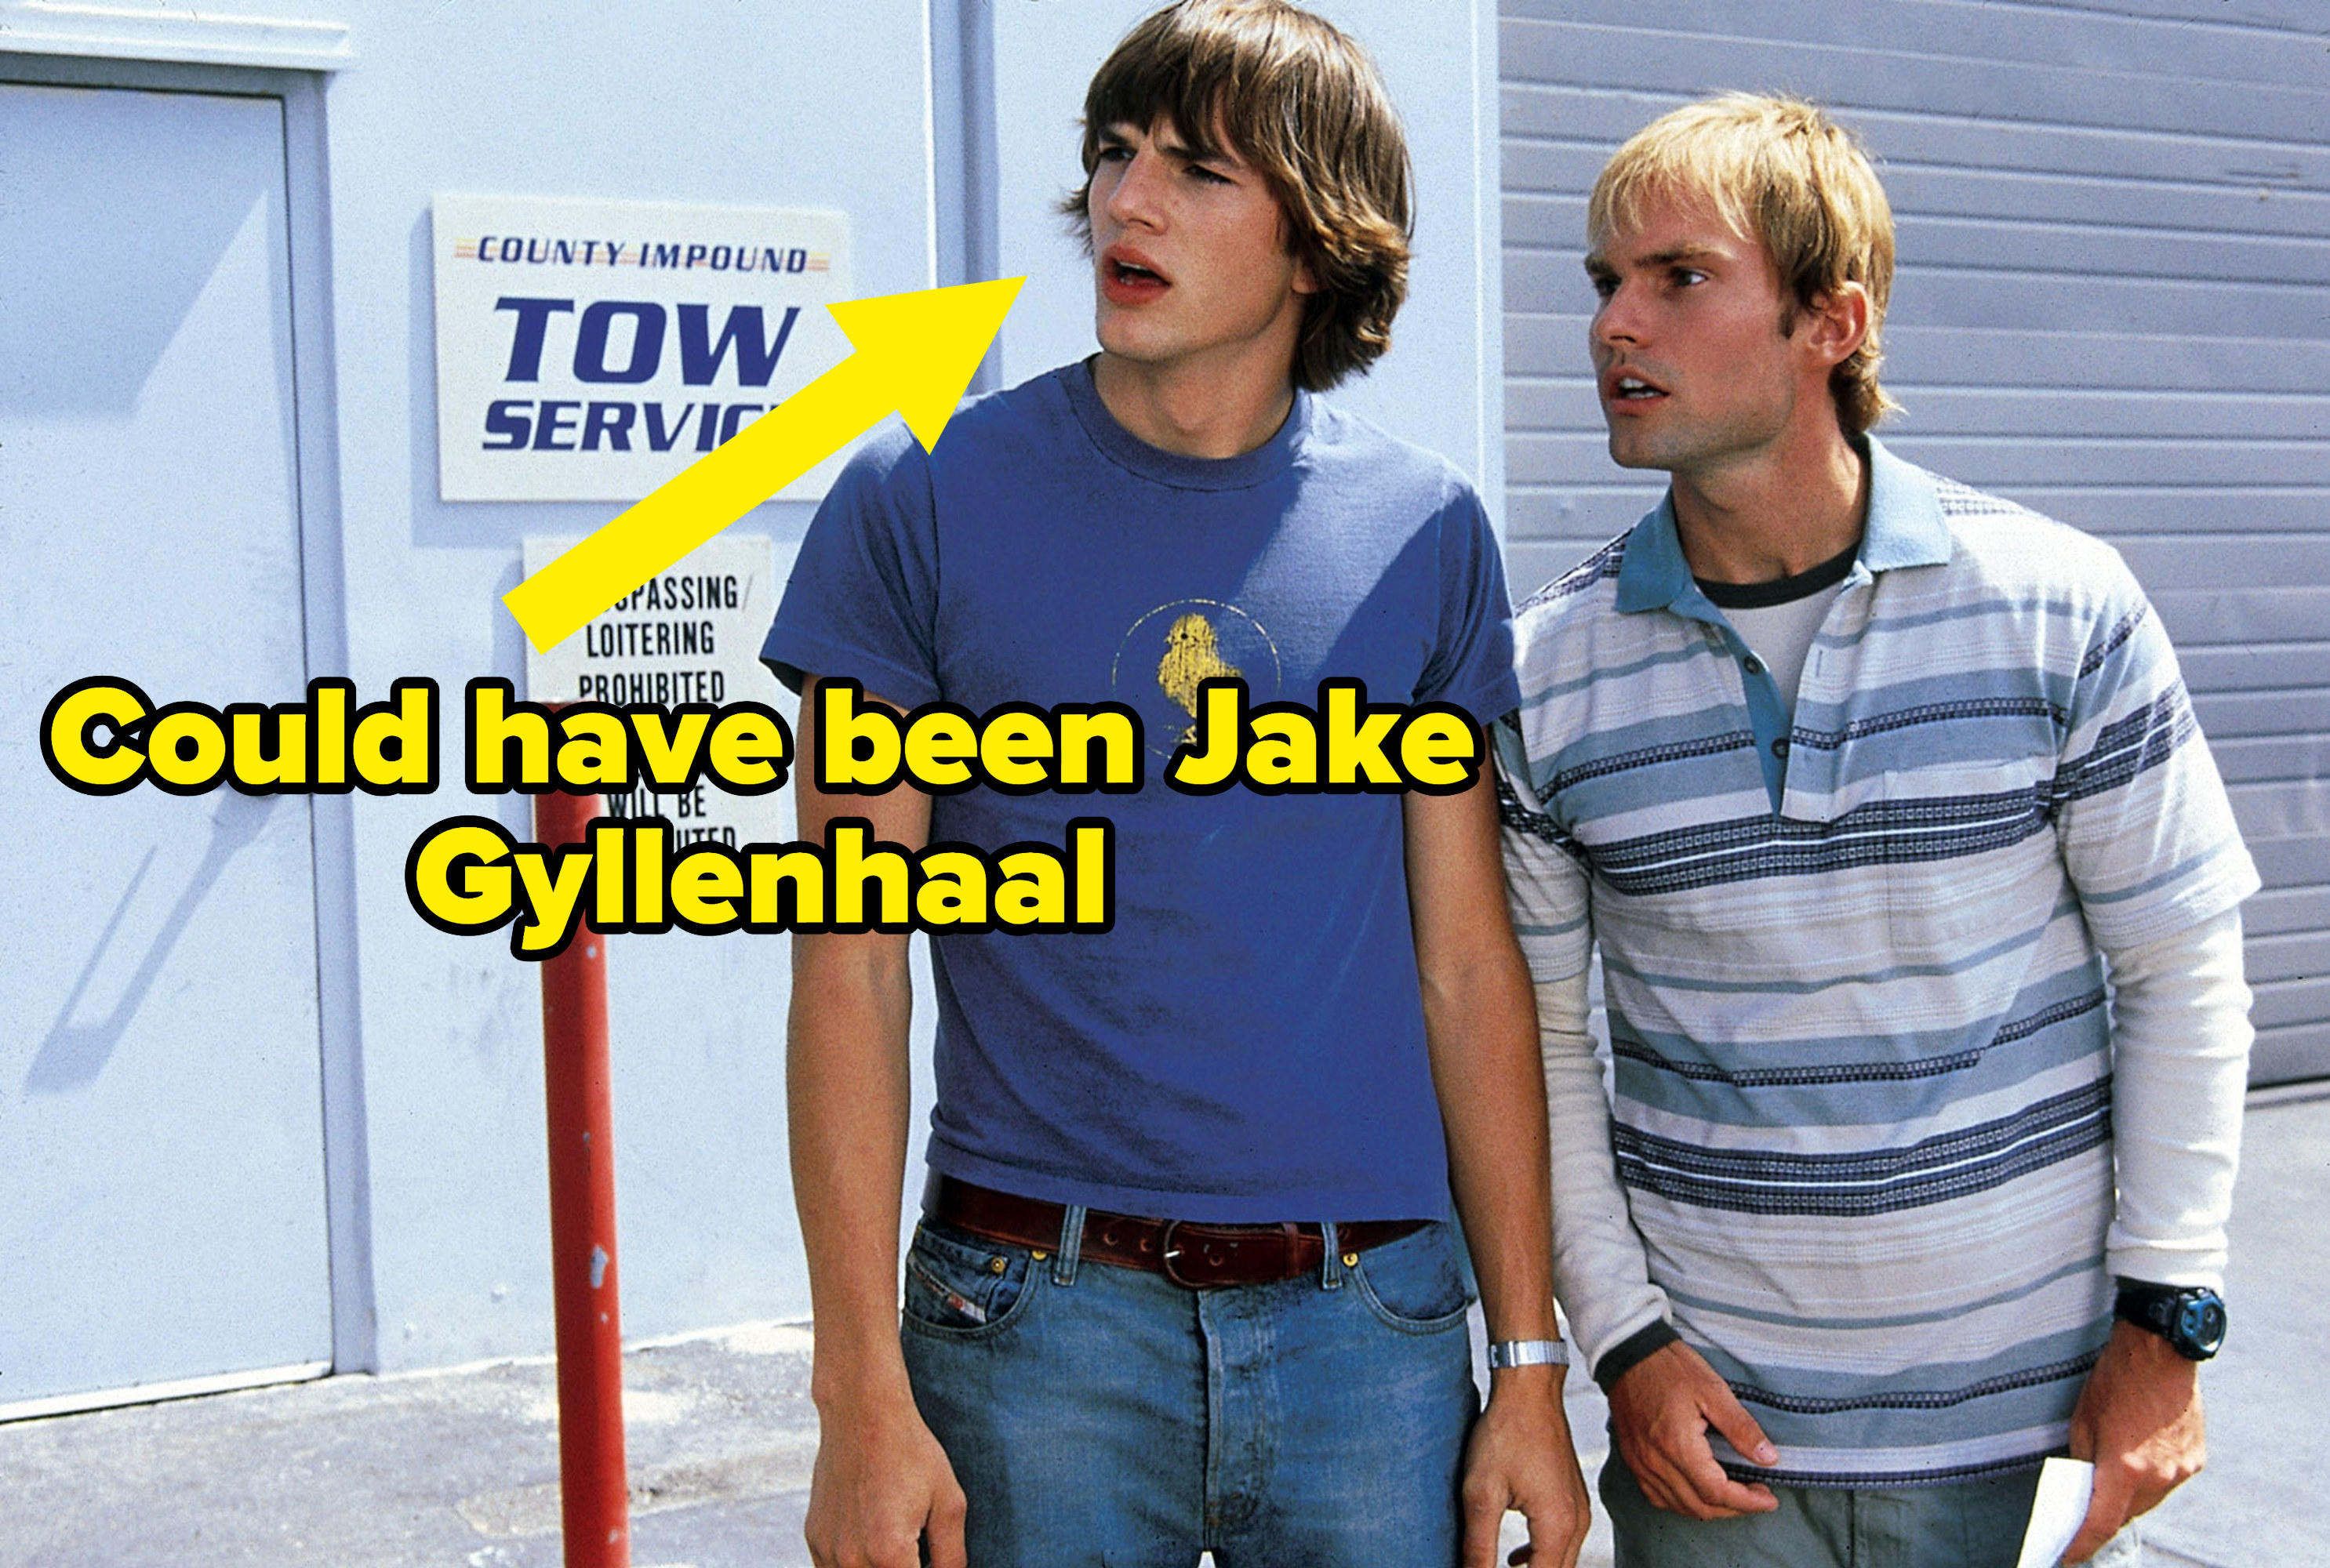 Arrow pointing to Ashton Kutcher in the film with the caption &quot;Could&#x27;ve been Jake Gyllenhaal&quot;